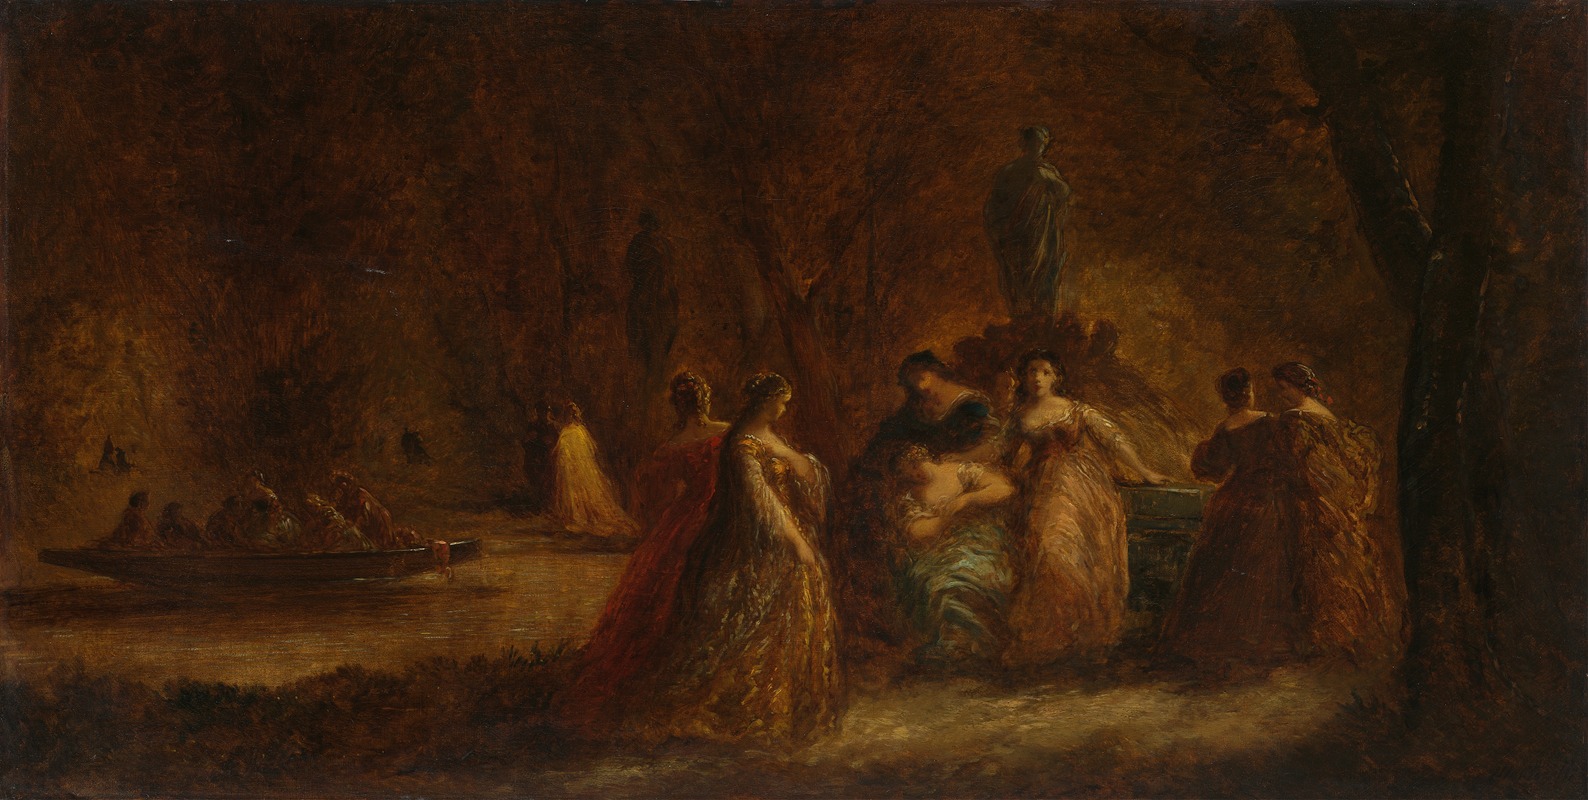 Adolphe Monticelli - A Woodland Fête